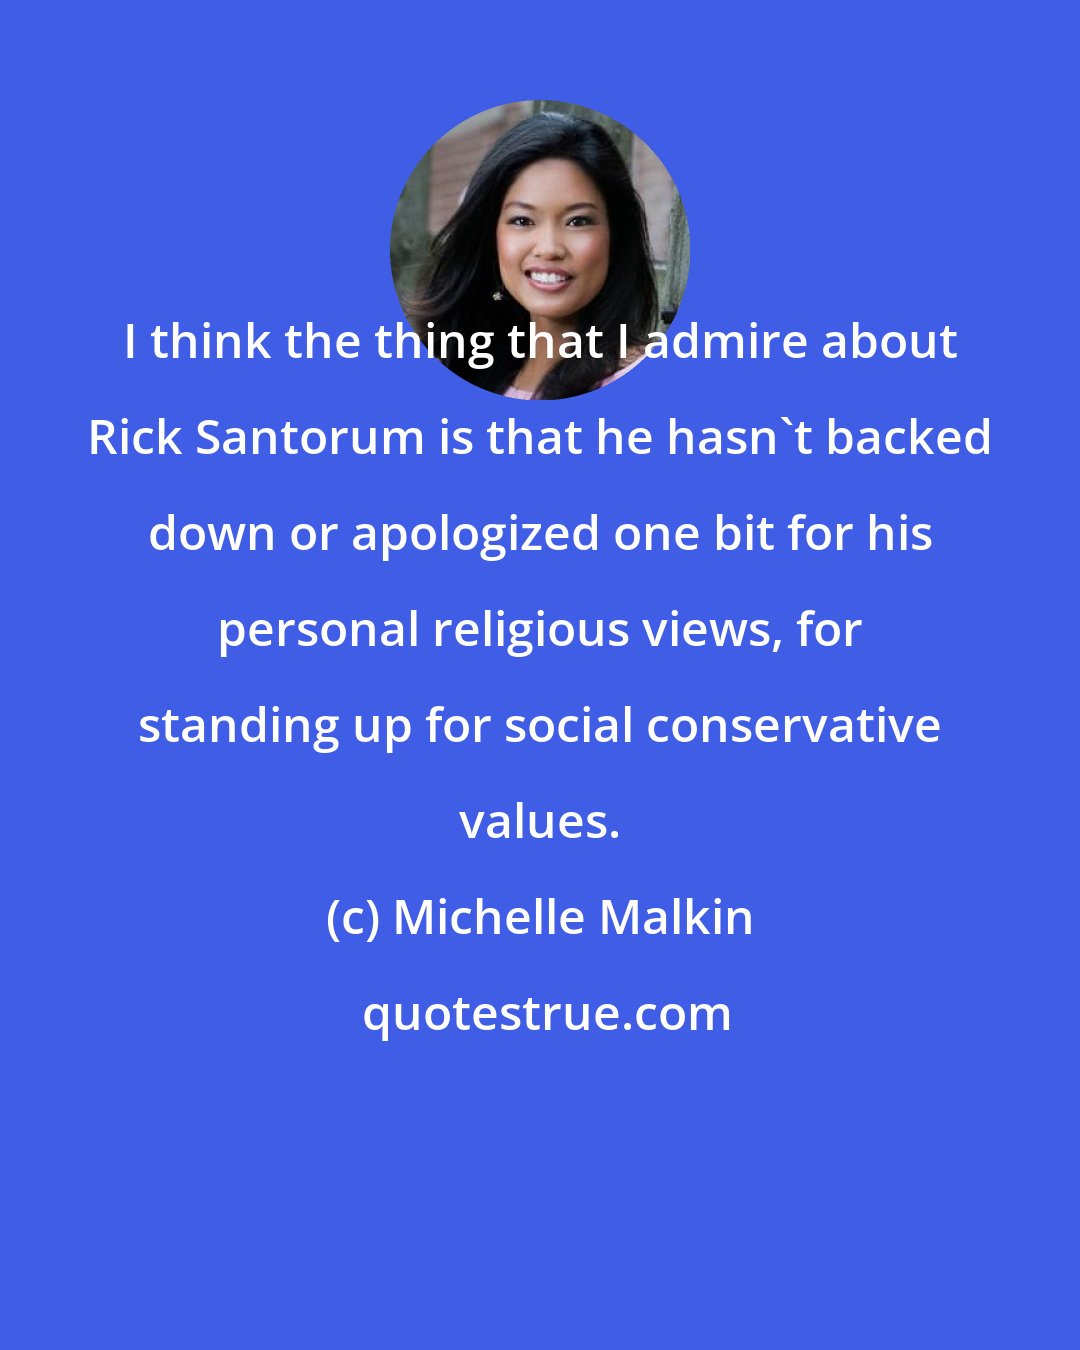 Michelle Malkin: I think the thing that I admire about Rick Santorum is that he hasn't backed down or apologized one bit for his personal religious views, for standing up for social conservative values.